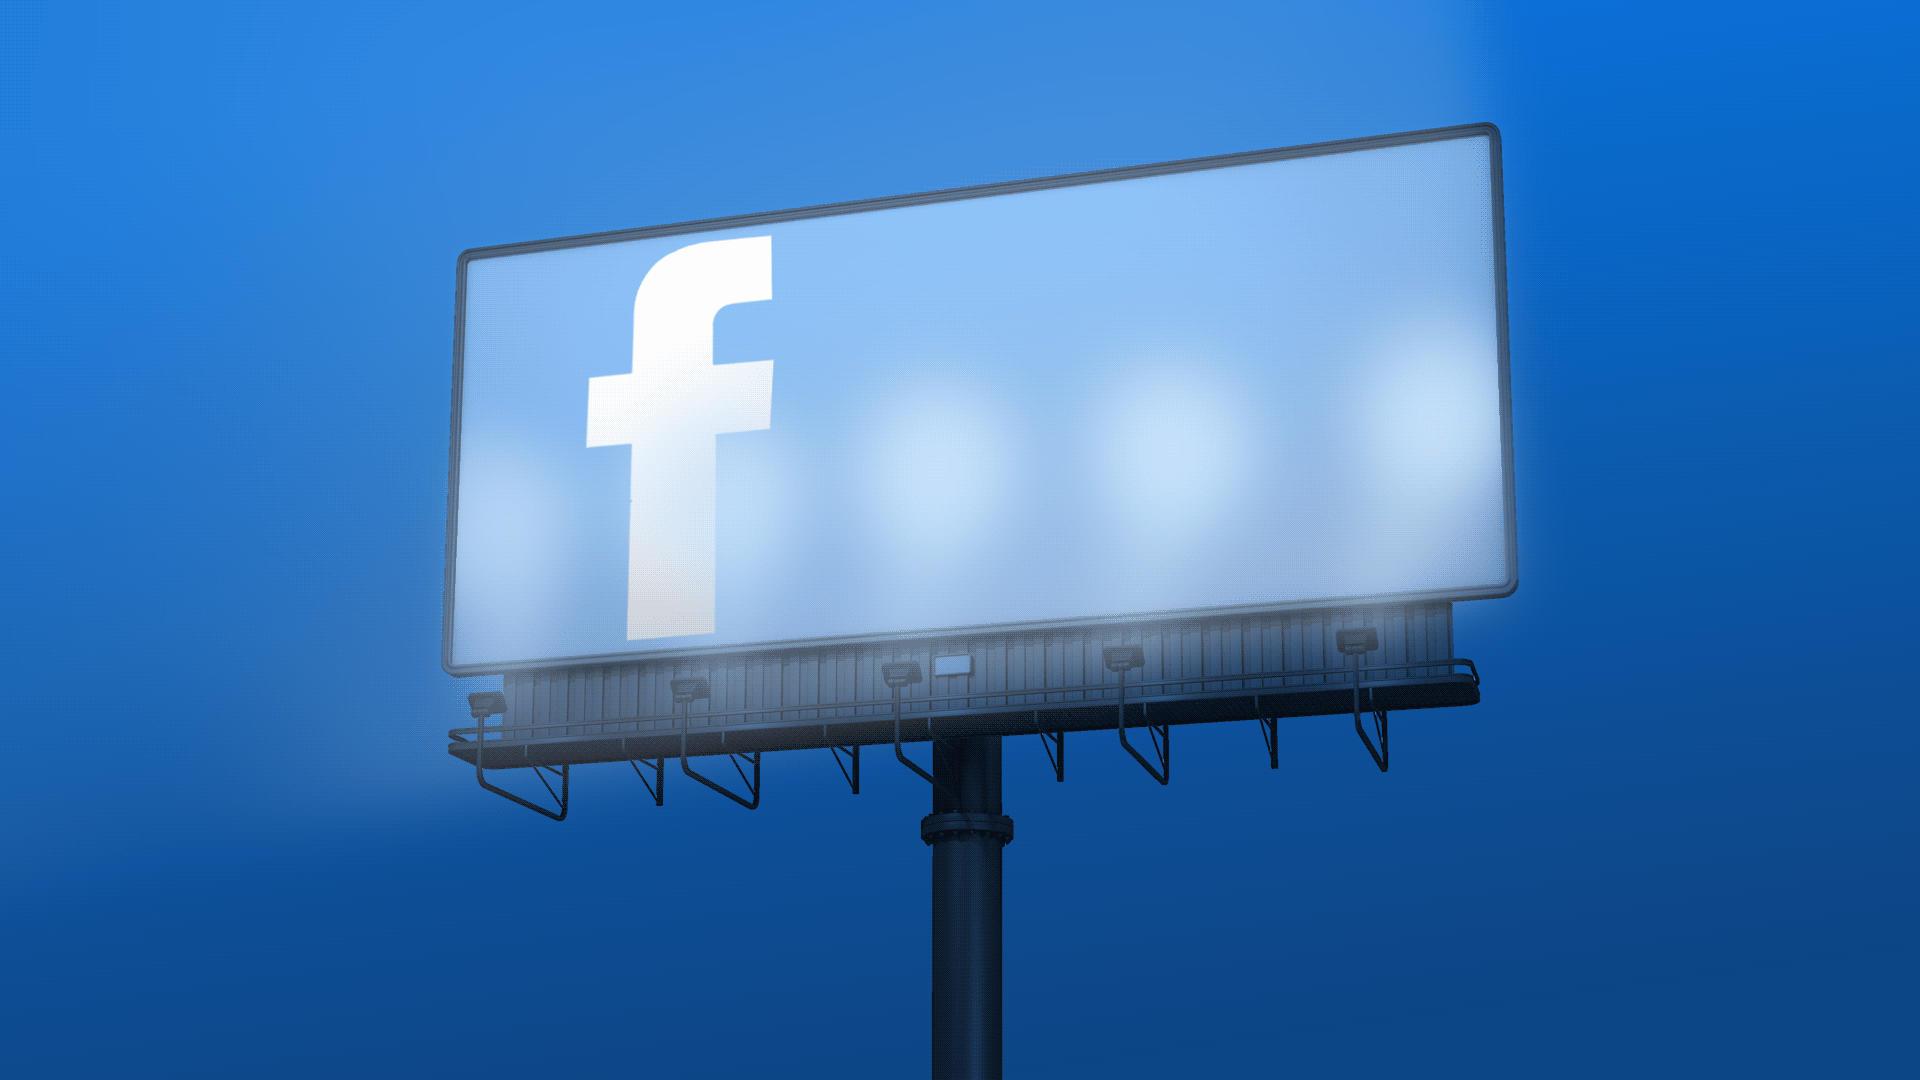 Illustration of a billboard with the facebook logo on it turning off